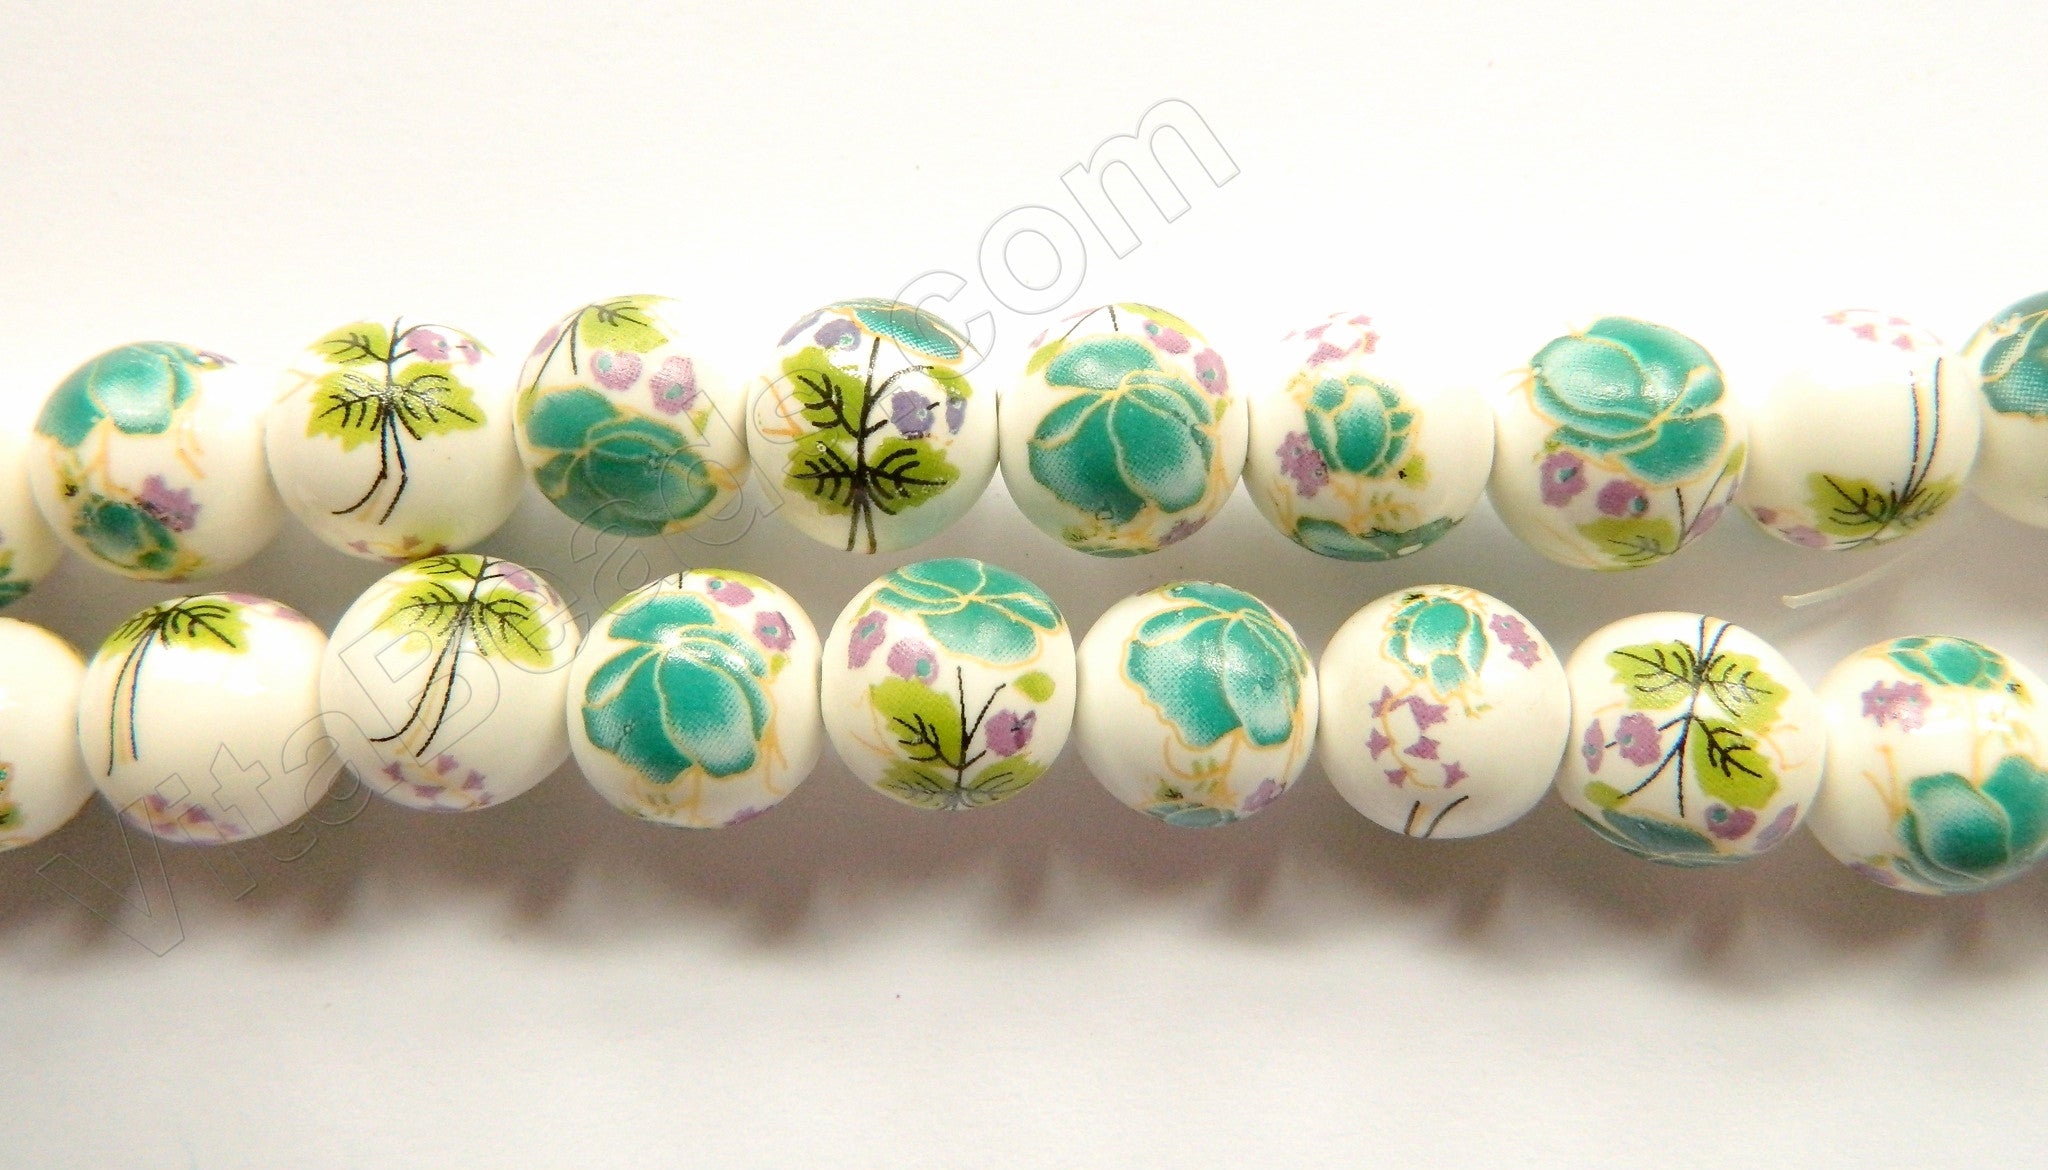 Porcelain Beads - White w/ Green Flora Beads  - 12 mm Smooth Round